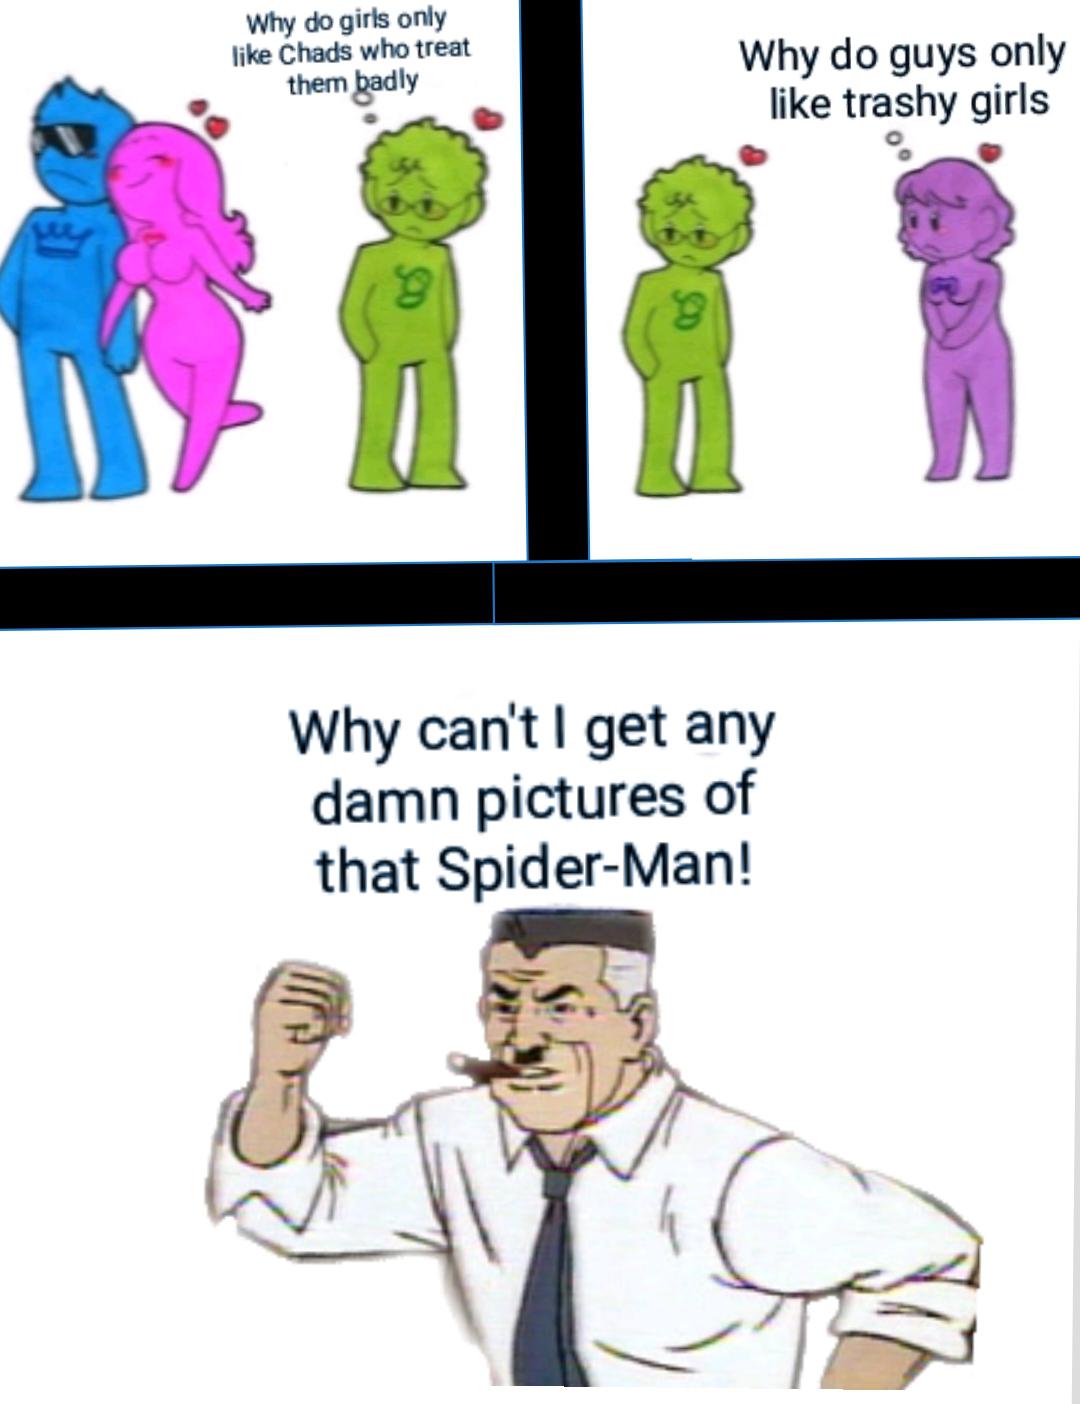 Dank Meme dank-memes cute text: Why do girls only like Chads who treat tt*m Why do guys only like trashy girls Why can't I get any damn pictures of that Spider-Man! 